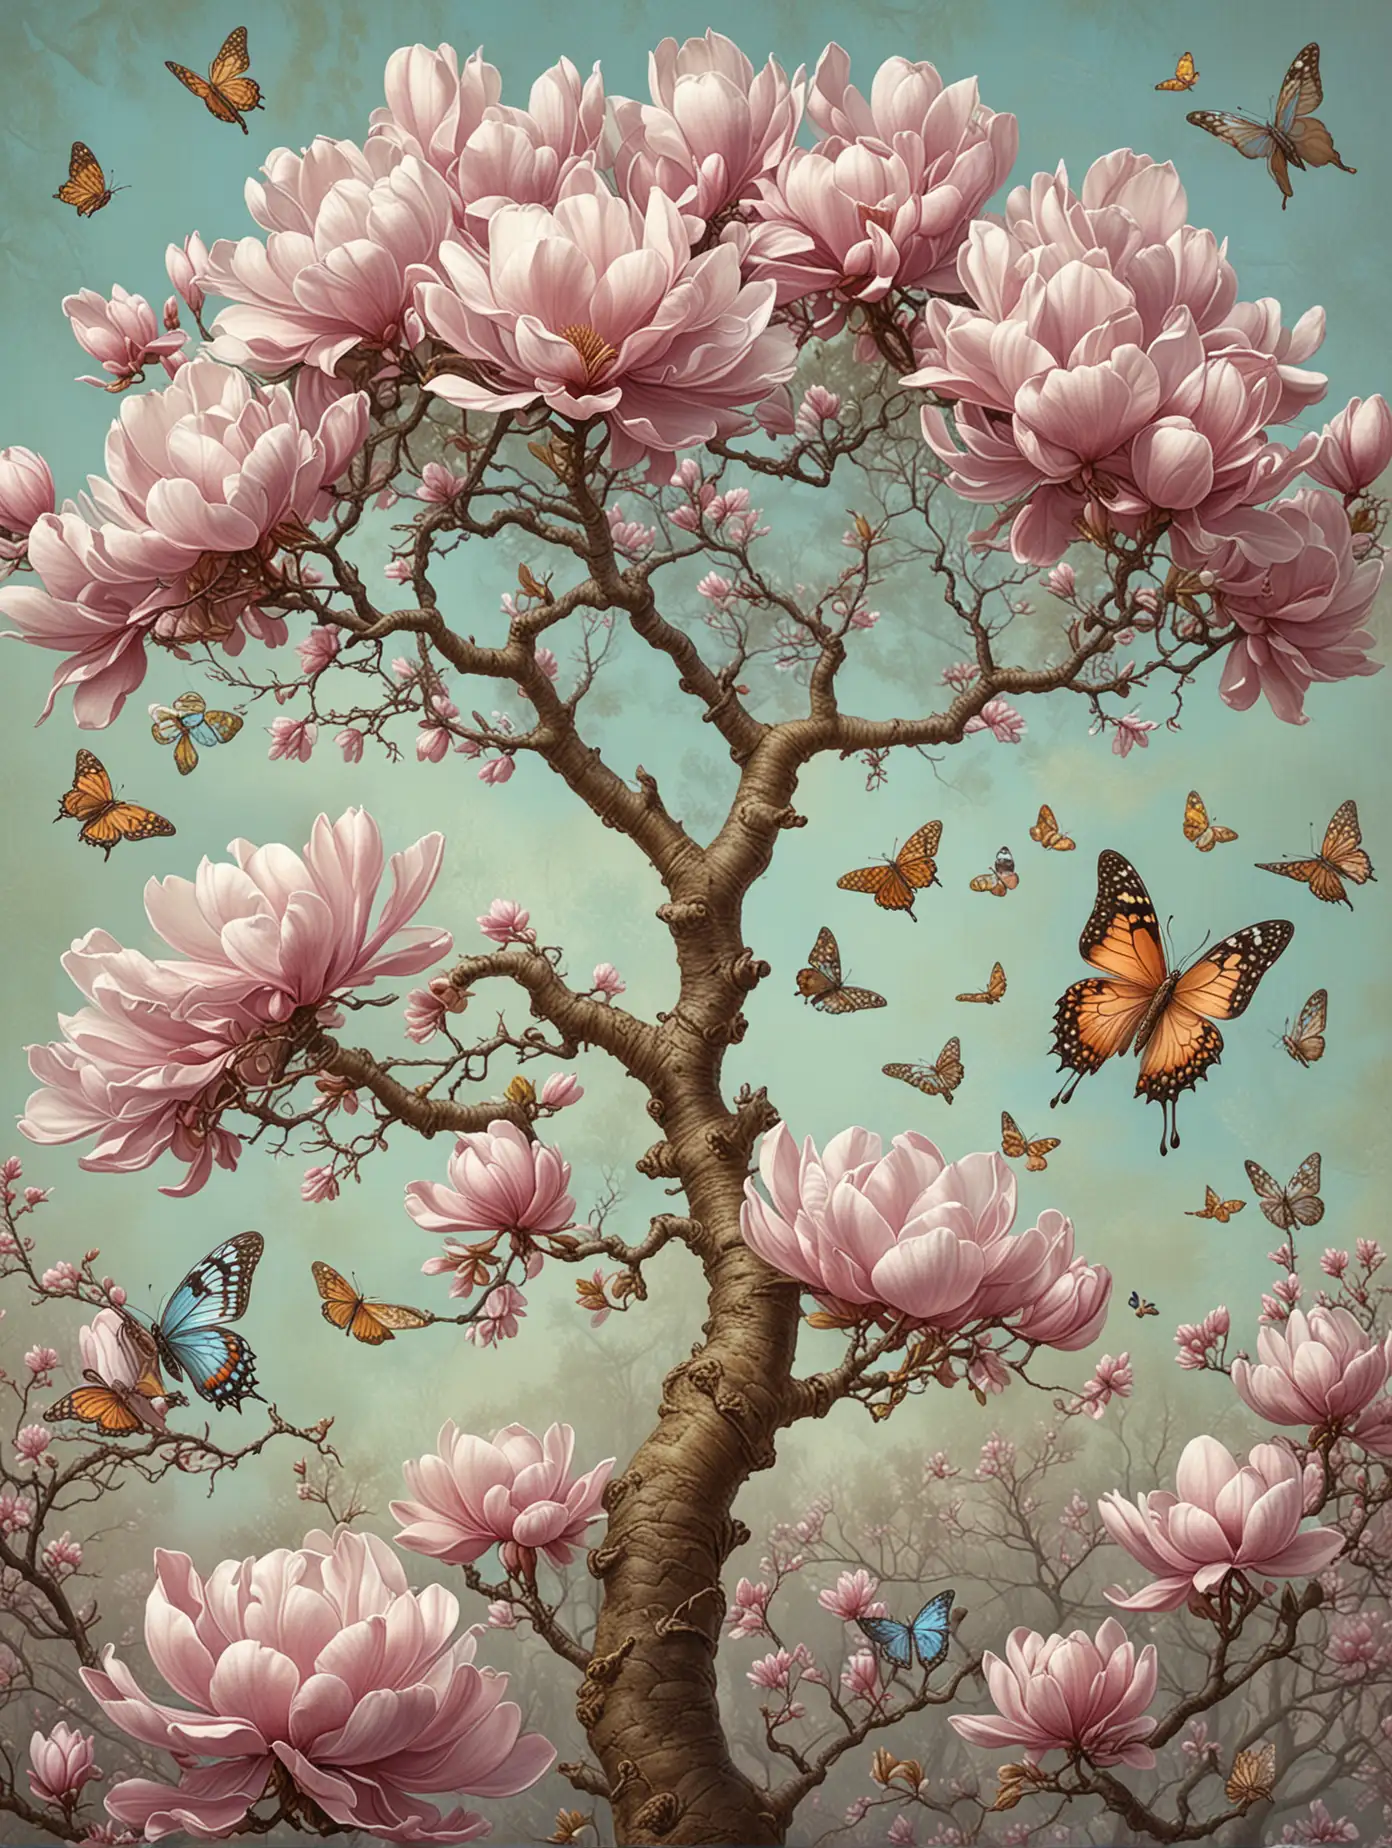 Pastel Magnolia Blossoms with Butterflies in a Vintage Kerem Beyit Style